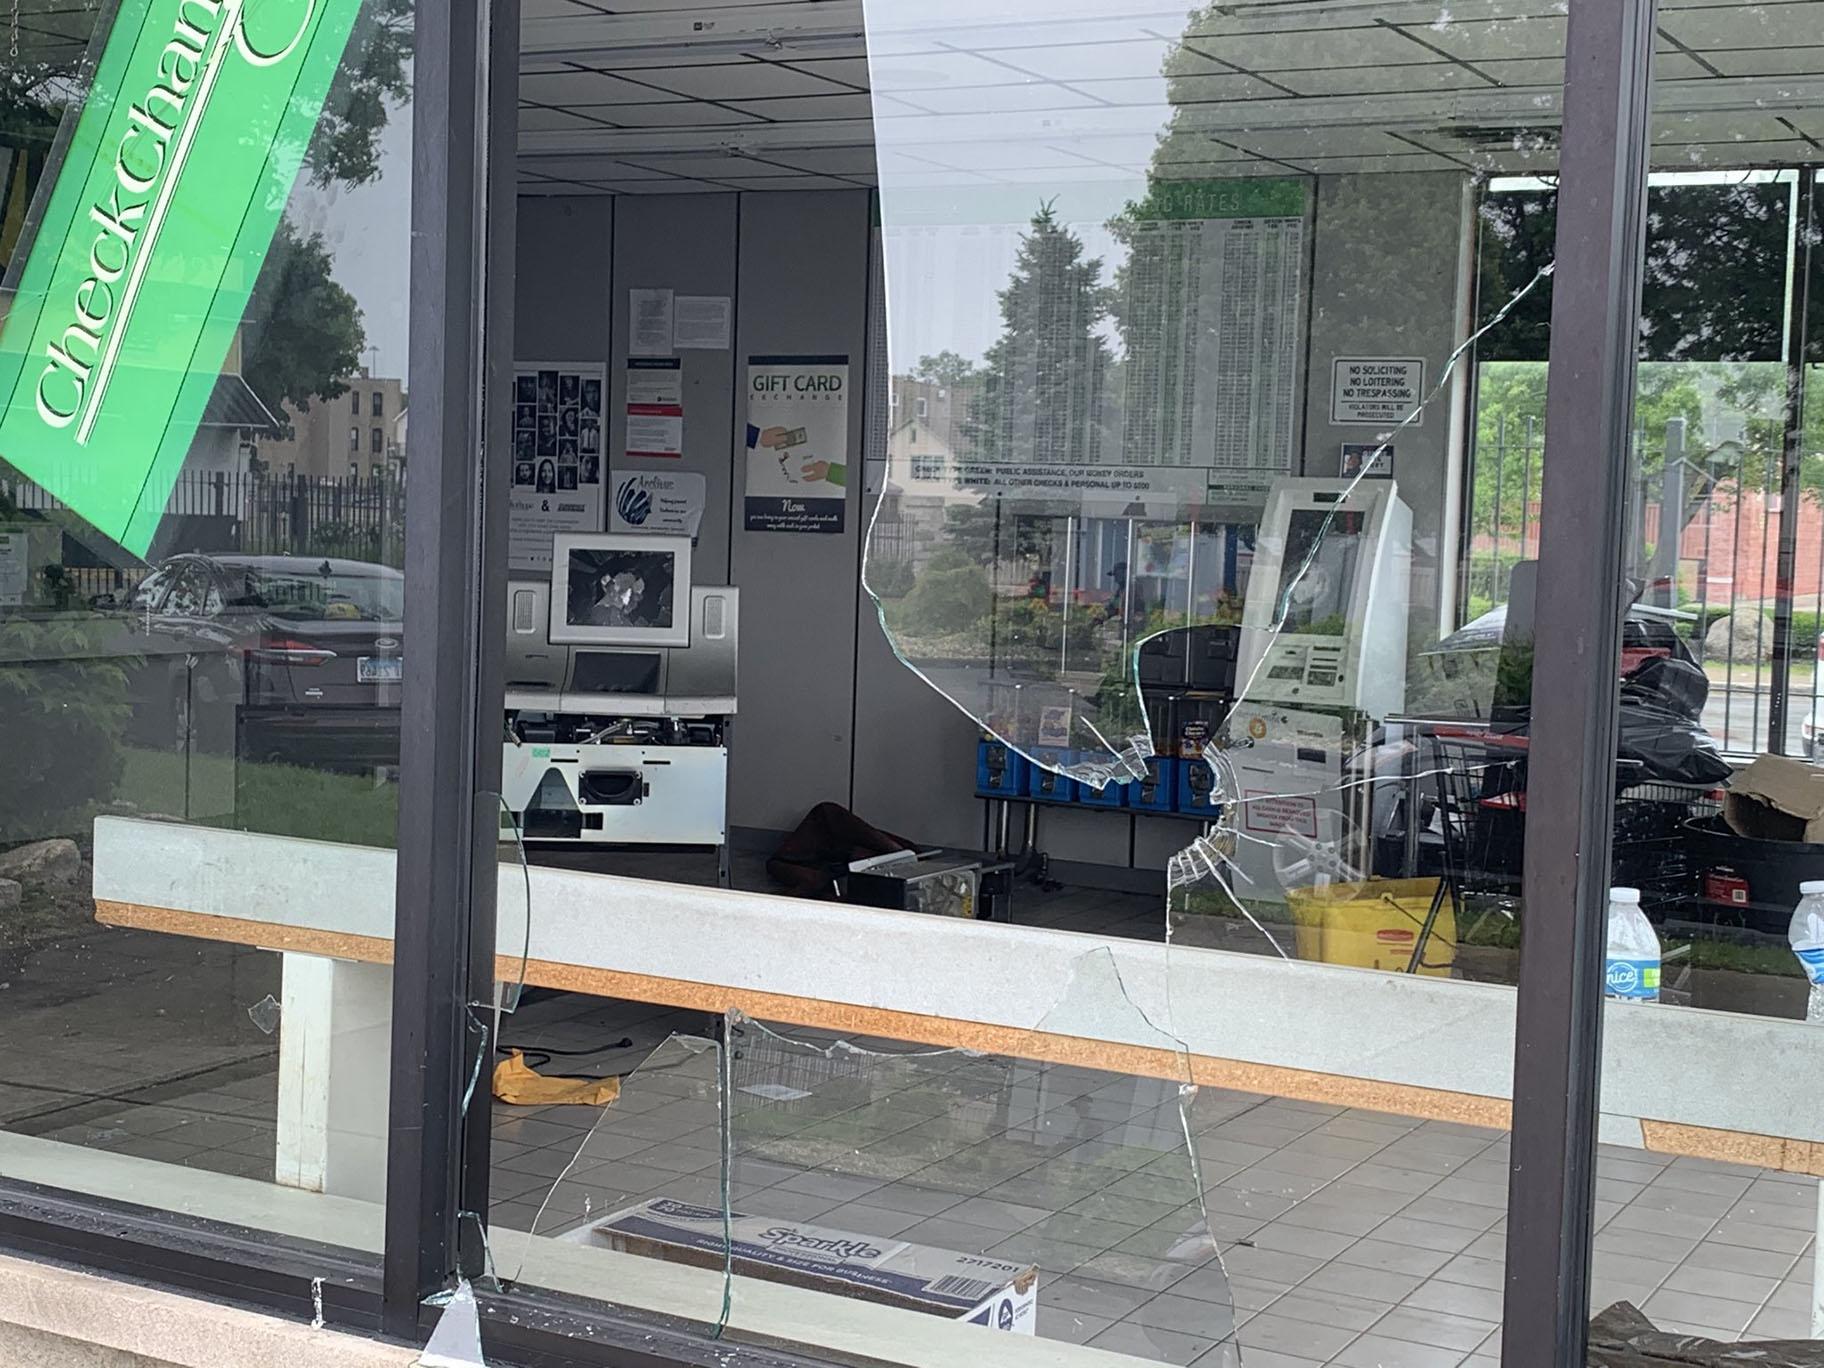 A check cashing store on 51st Street in Chicago after a weekend of looting resembles other sites across the city, with windows and equipment smashed. (@paschutz / Twitter)